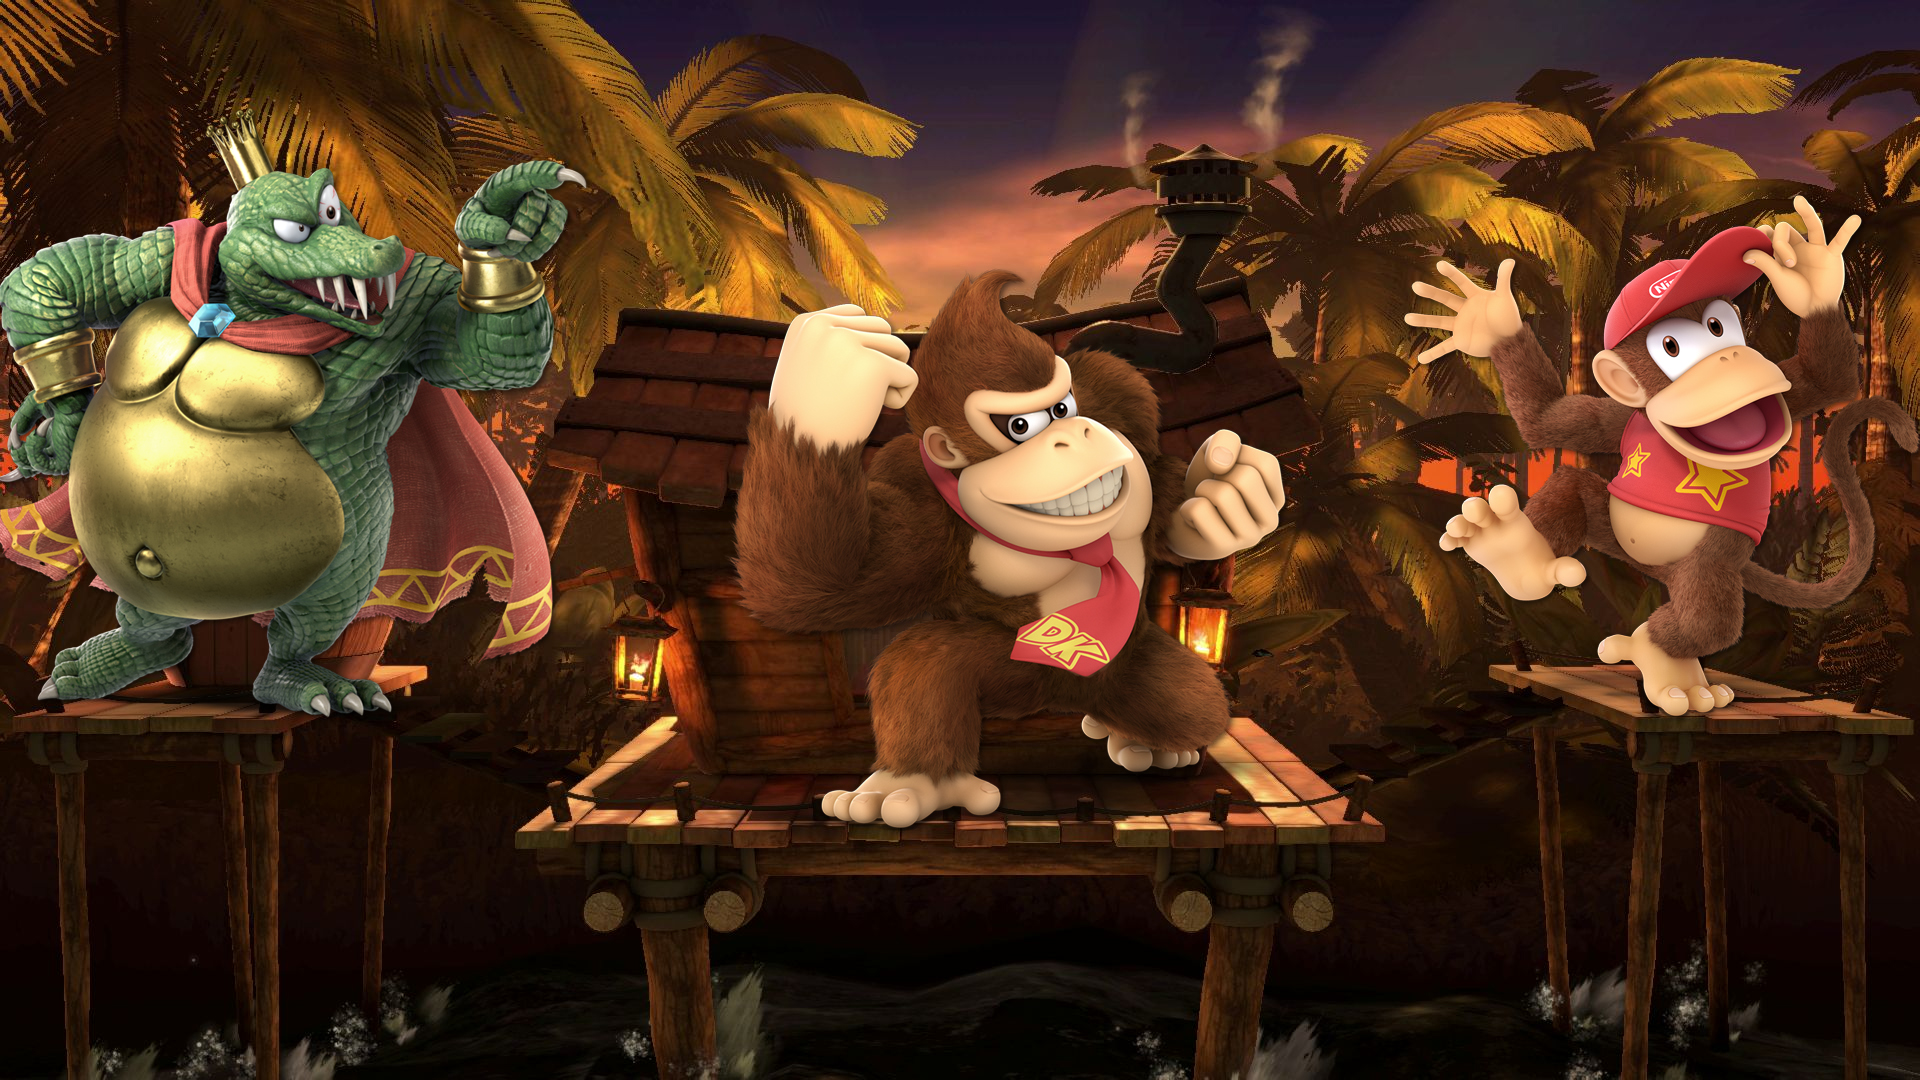 Deep Smash: The origins of Donkey Kong, Diddy, and King K. Rool's